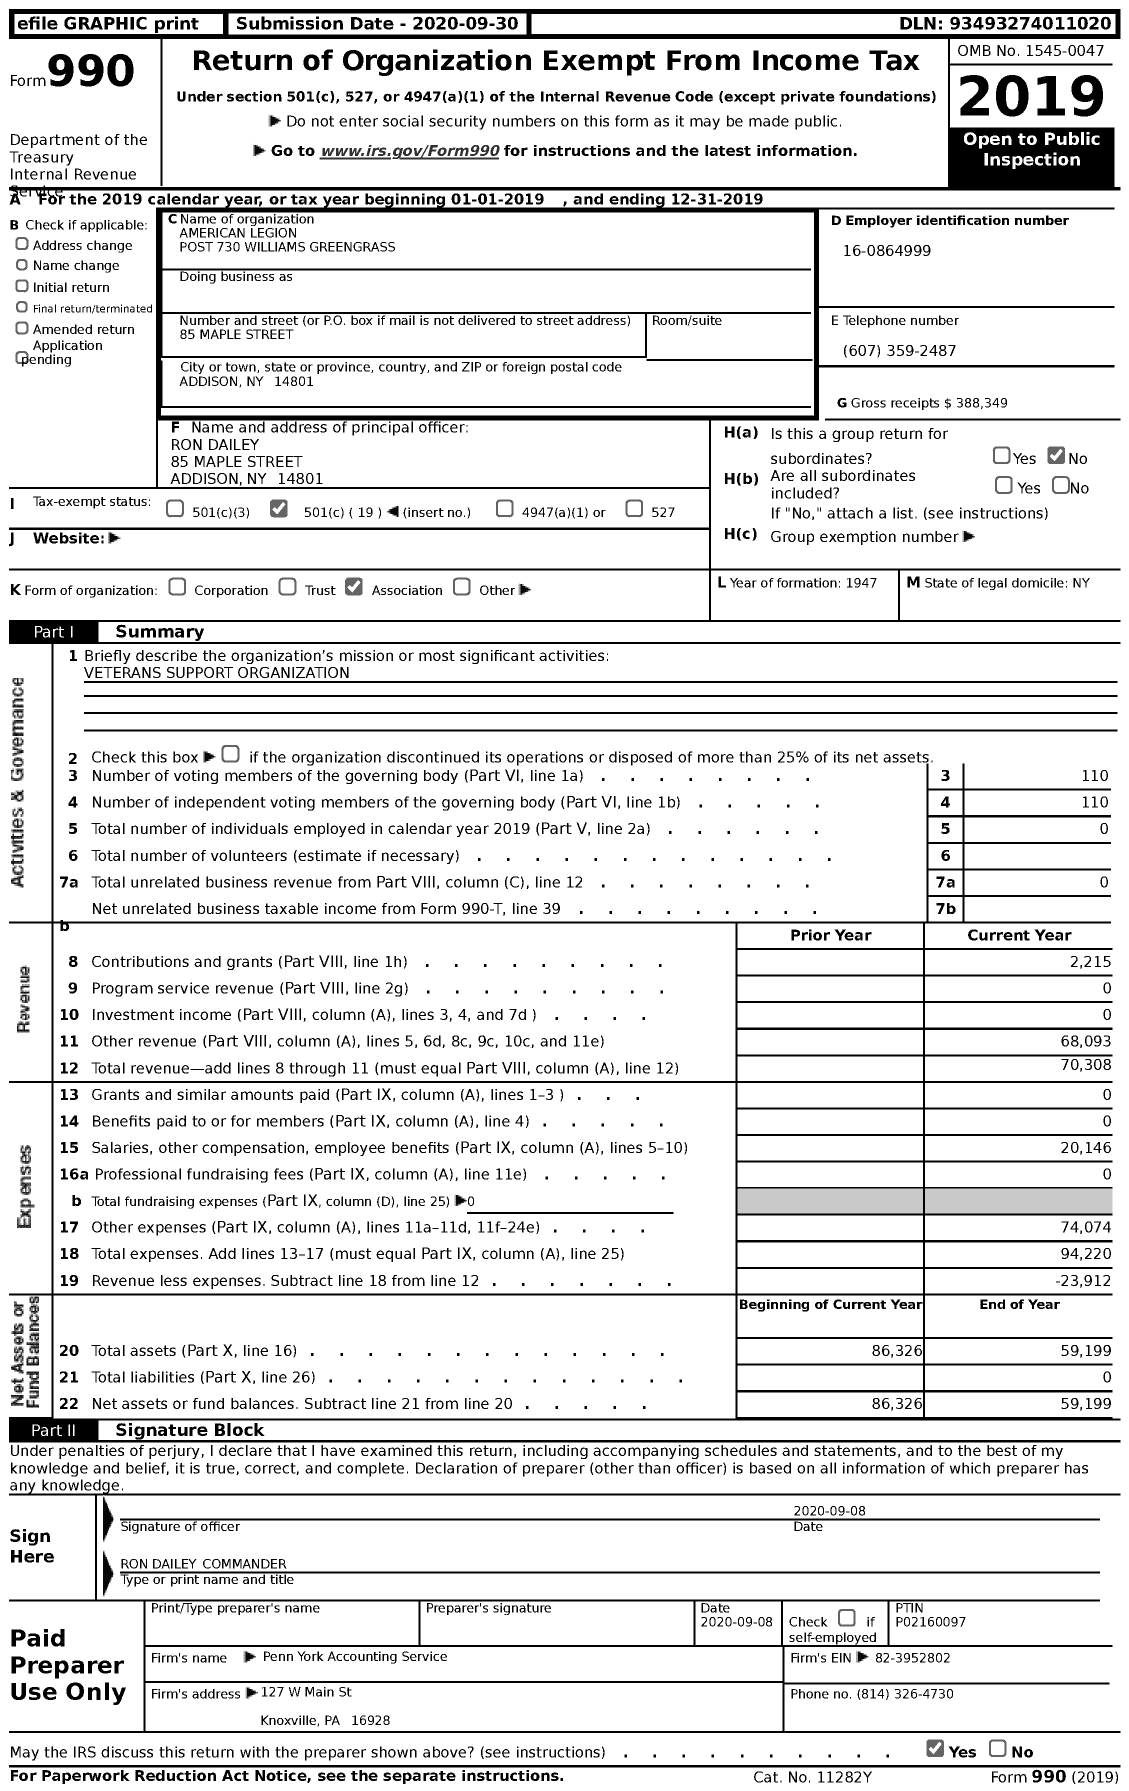 Image of first page of 2019 Form 990 for American Legion Post 730 Williams Greengrass